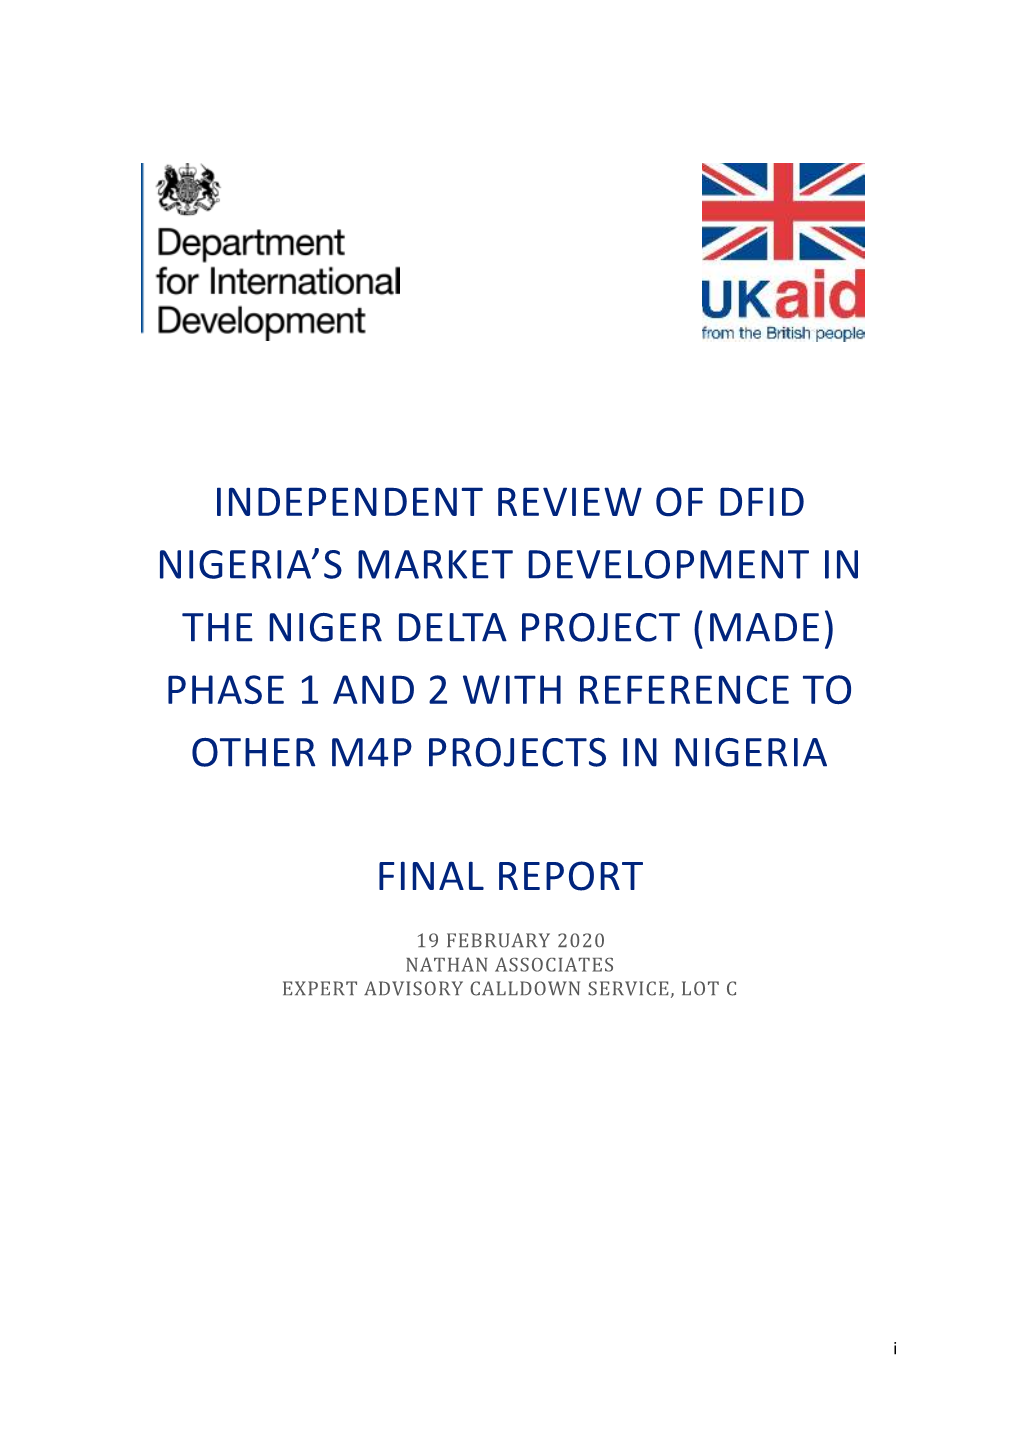 Independent Review of Dfid Nigeria's